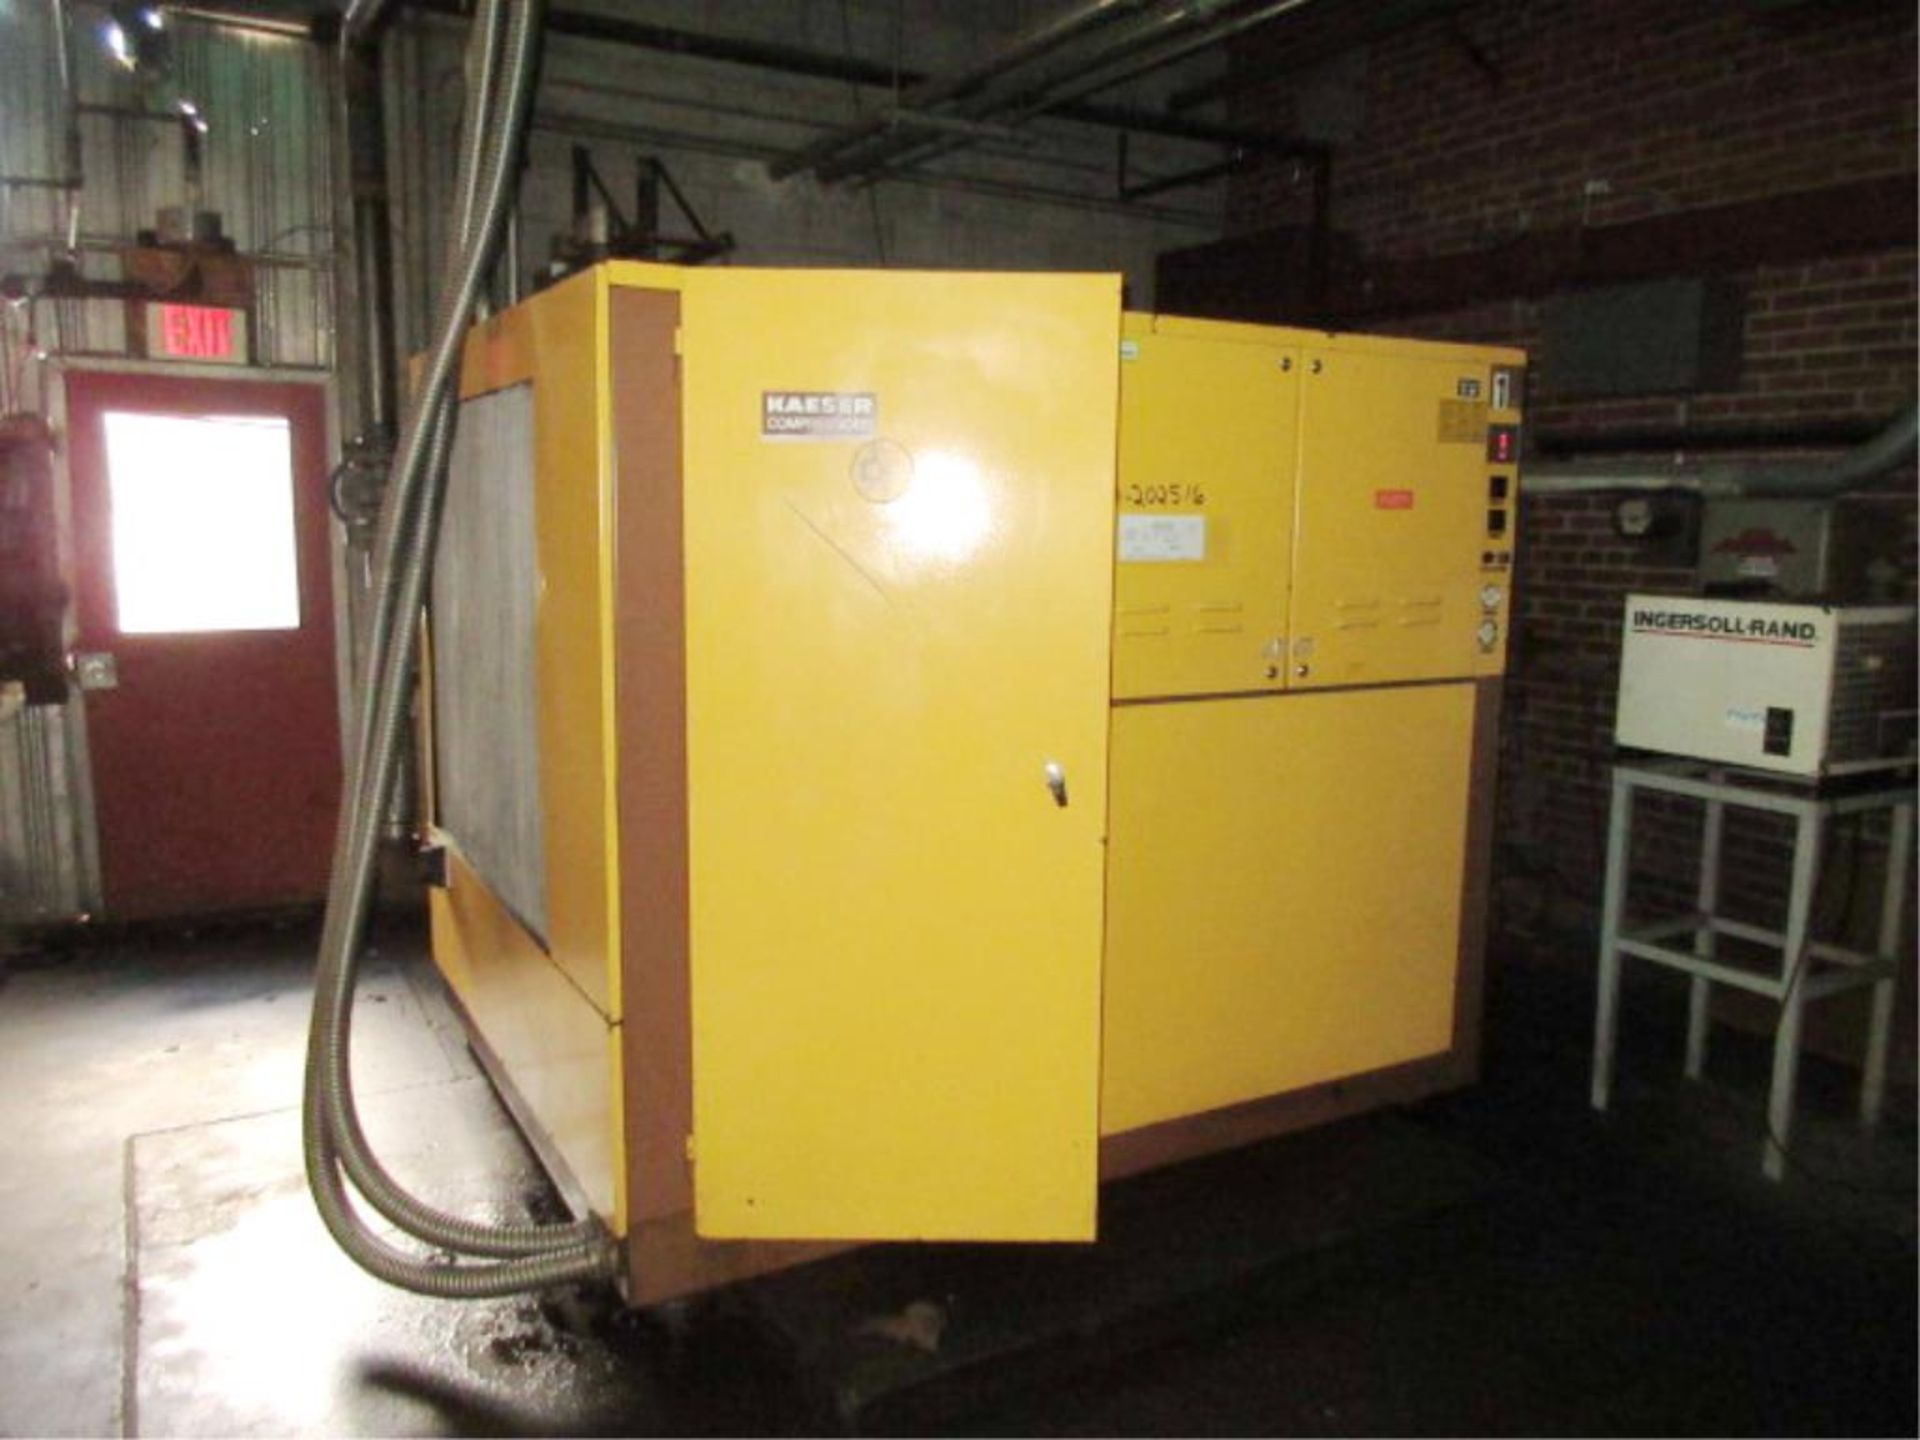 Kaeser ES 300 Sigma Profile Rotary Screw Air Compressor, (1987), 160 KW motor, service/load hrs.